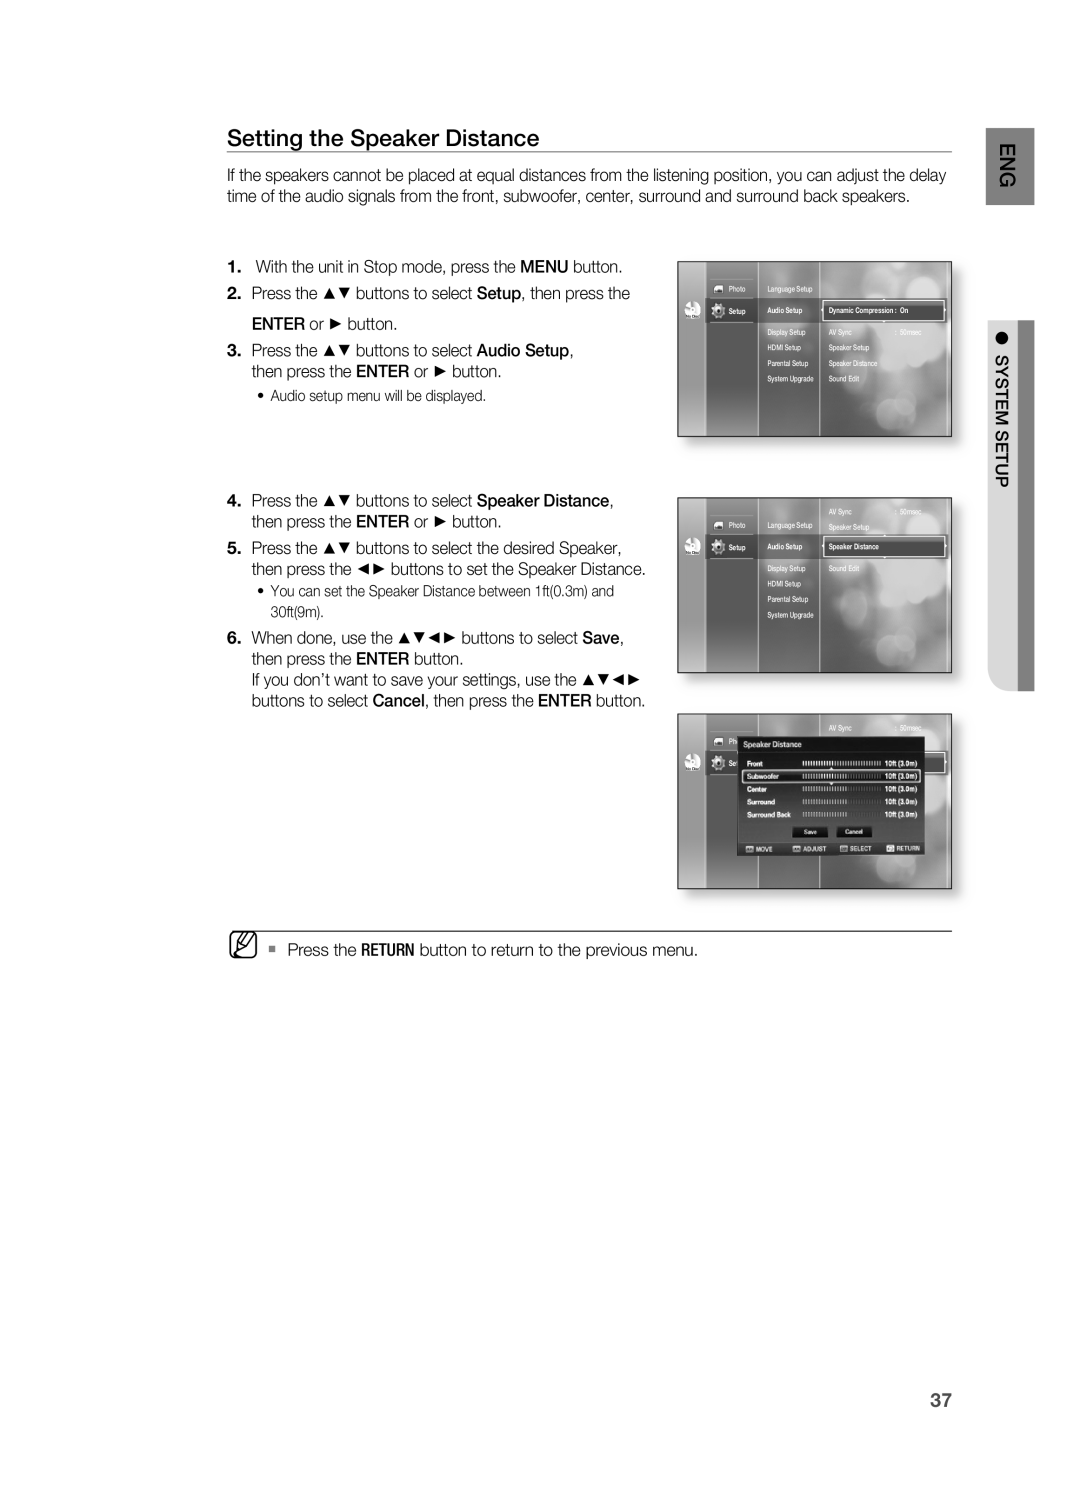 Samsung HT-BD2S manual Setting the Speaker Distance, EnTER or + button, Press the $% buttons to select Audio Setup 